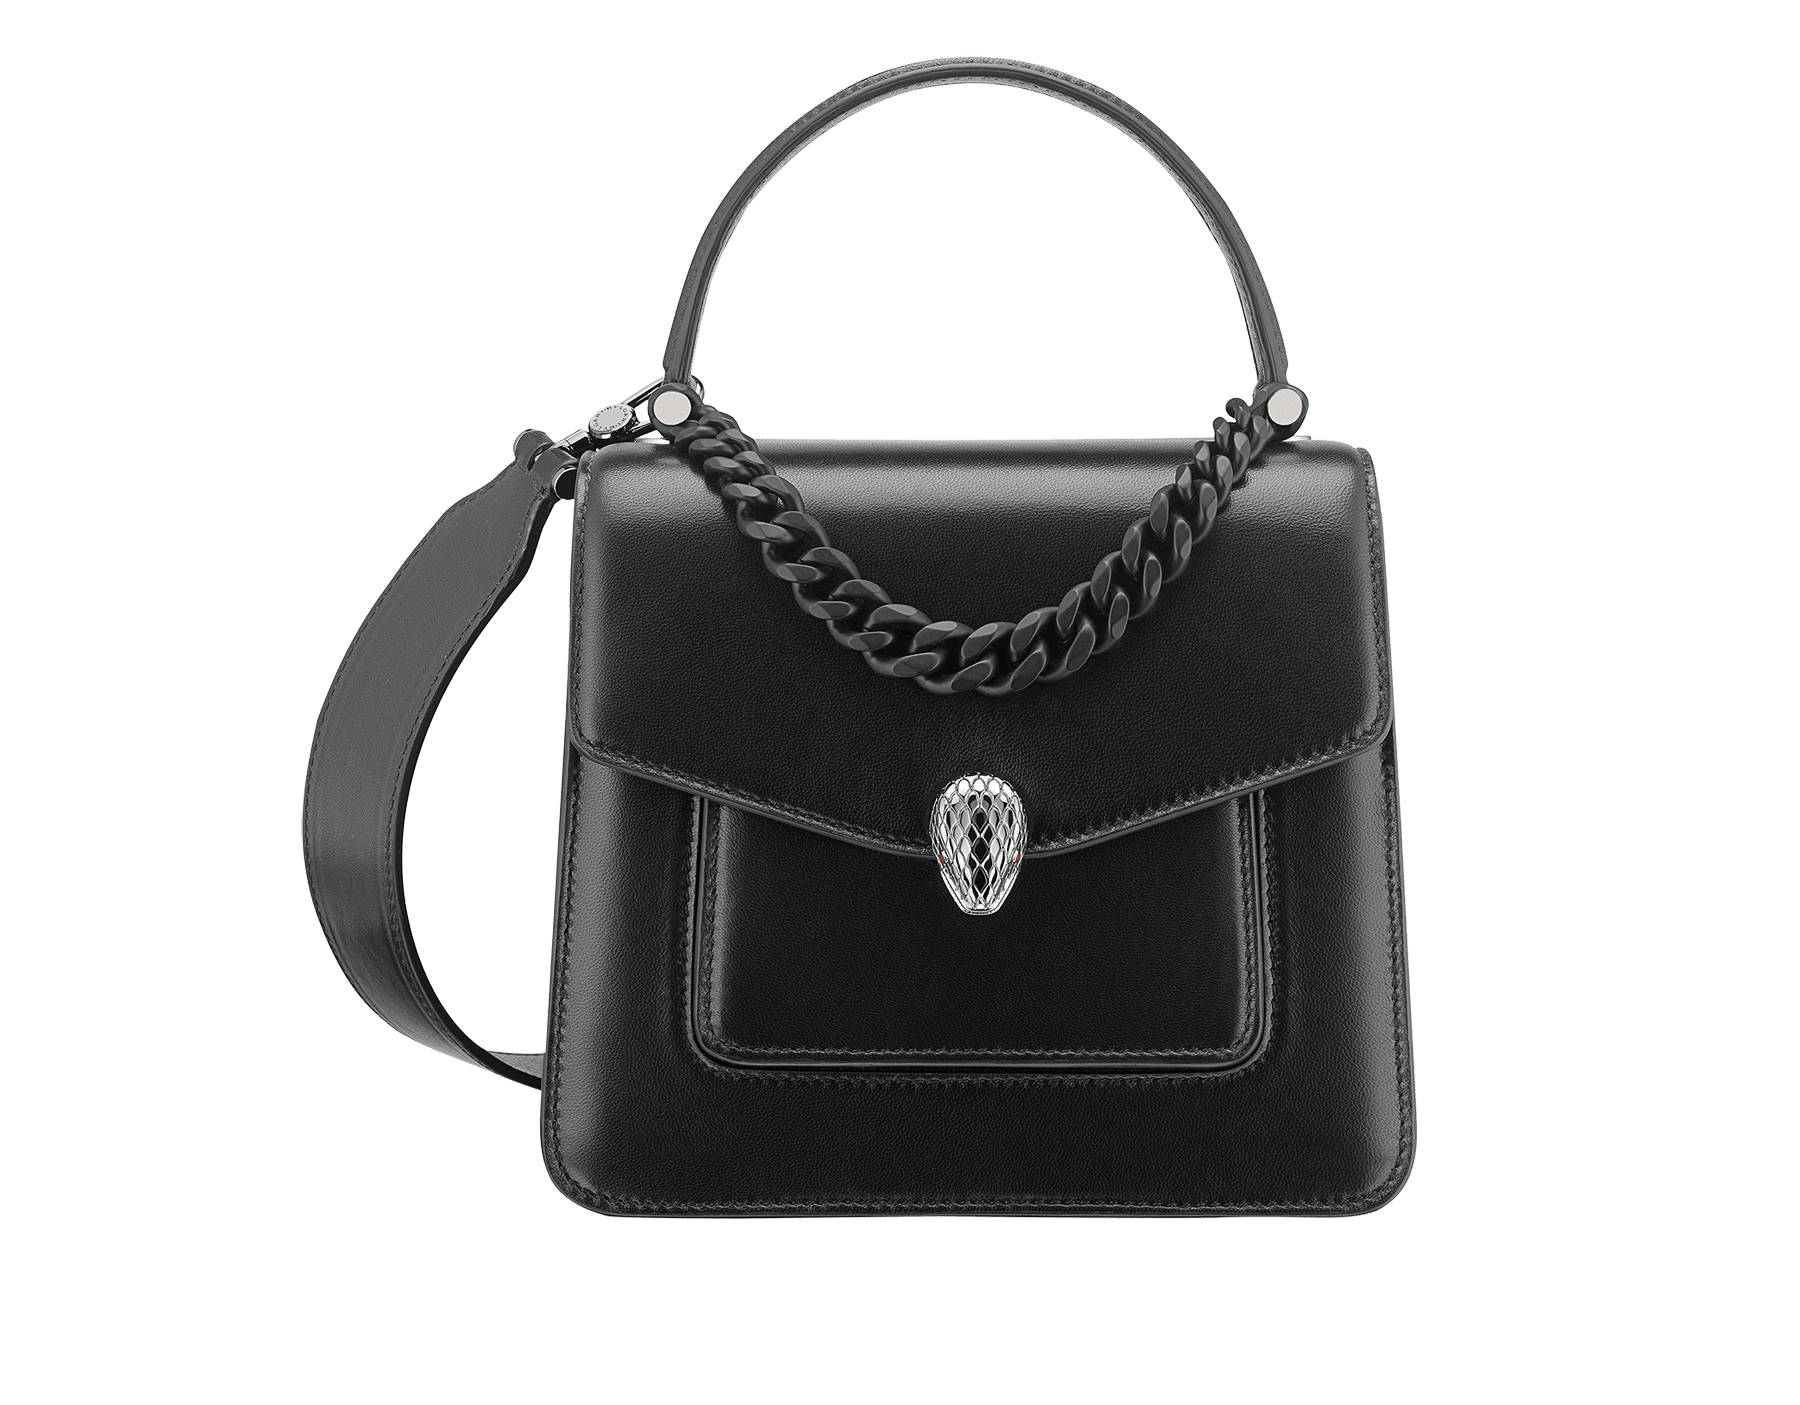 "Serpenti Forever" small maxi chain top-handle bag in black nappa leather, with black nappa leather inner lining. New Serpenti head closure in dark ruthenium-plated brass and finished with small black onyx scales in the middle and red enamel eyes. 290874 image 1